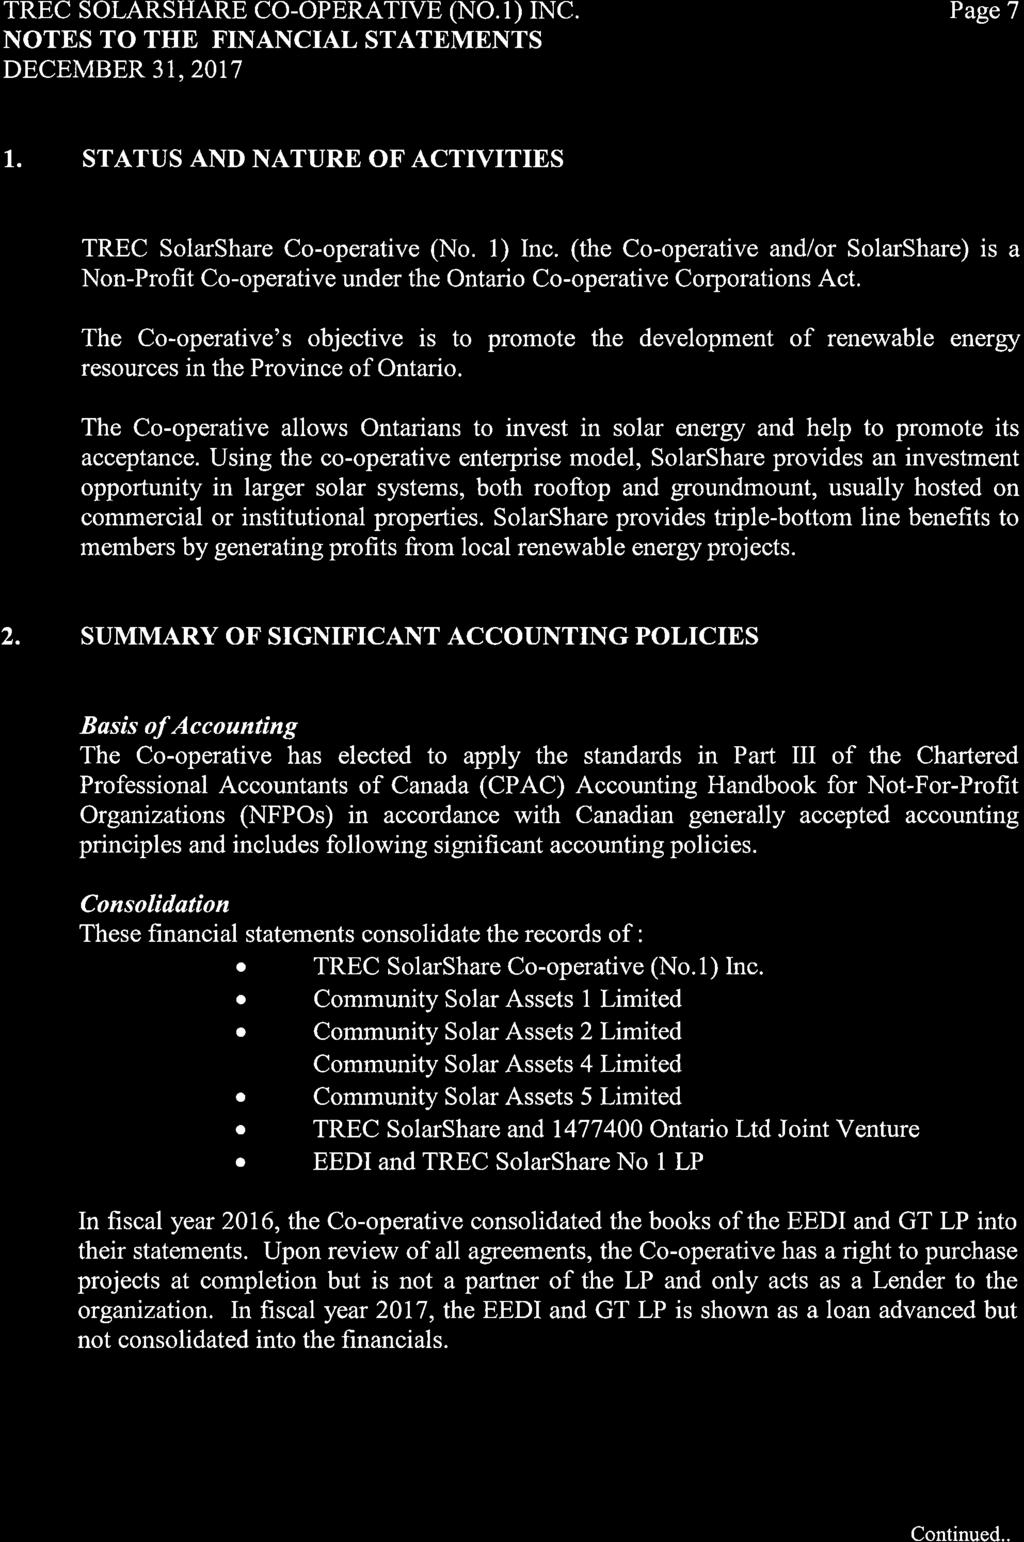 TREC SOLARSHARE CO-OPERATTVE (NO.r) rnc. NOTES TO THE FINANCIAL STATEMENTS DECEMBER3I,2OTT PageT 1. STATUS AND NATURE OF ACTIVITIES TREC SolarShare Co-operative (No. 1) Inc.